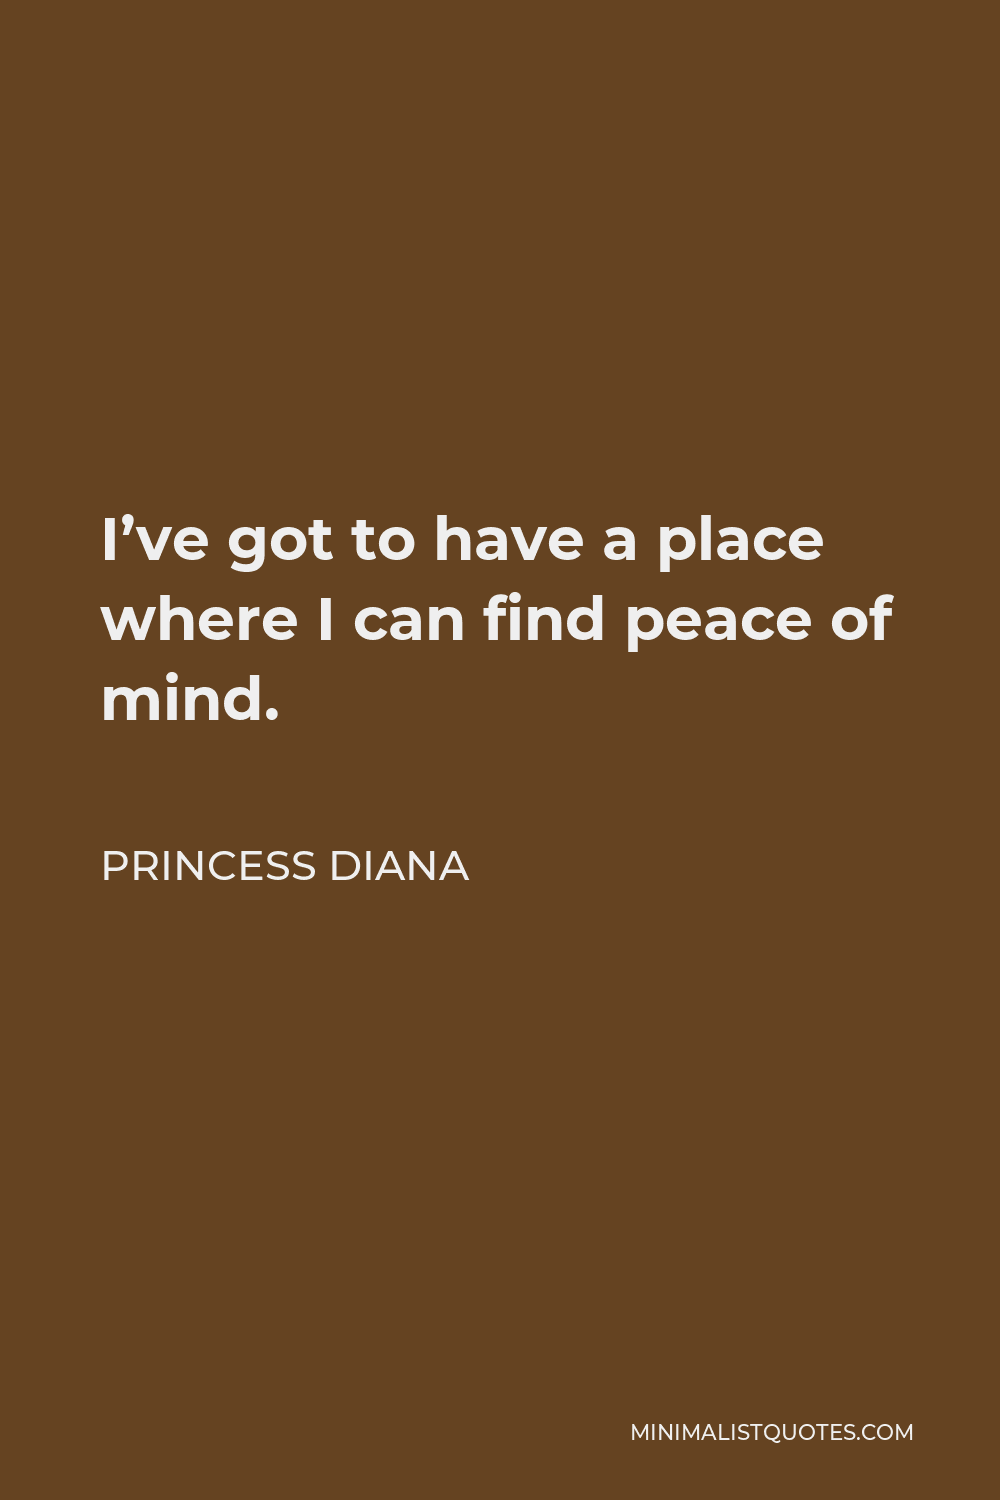 Princess Diana Quote - I’ve got to have a place where I can find peace of mind.